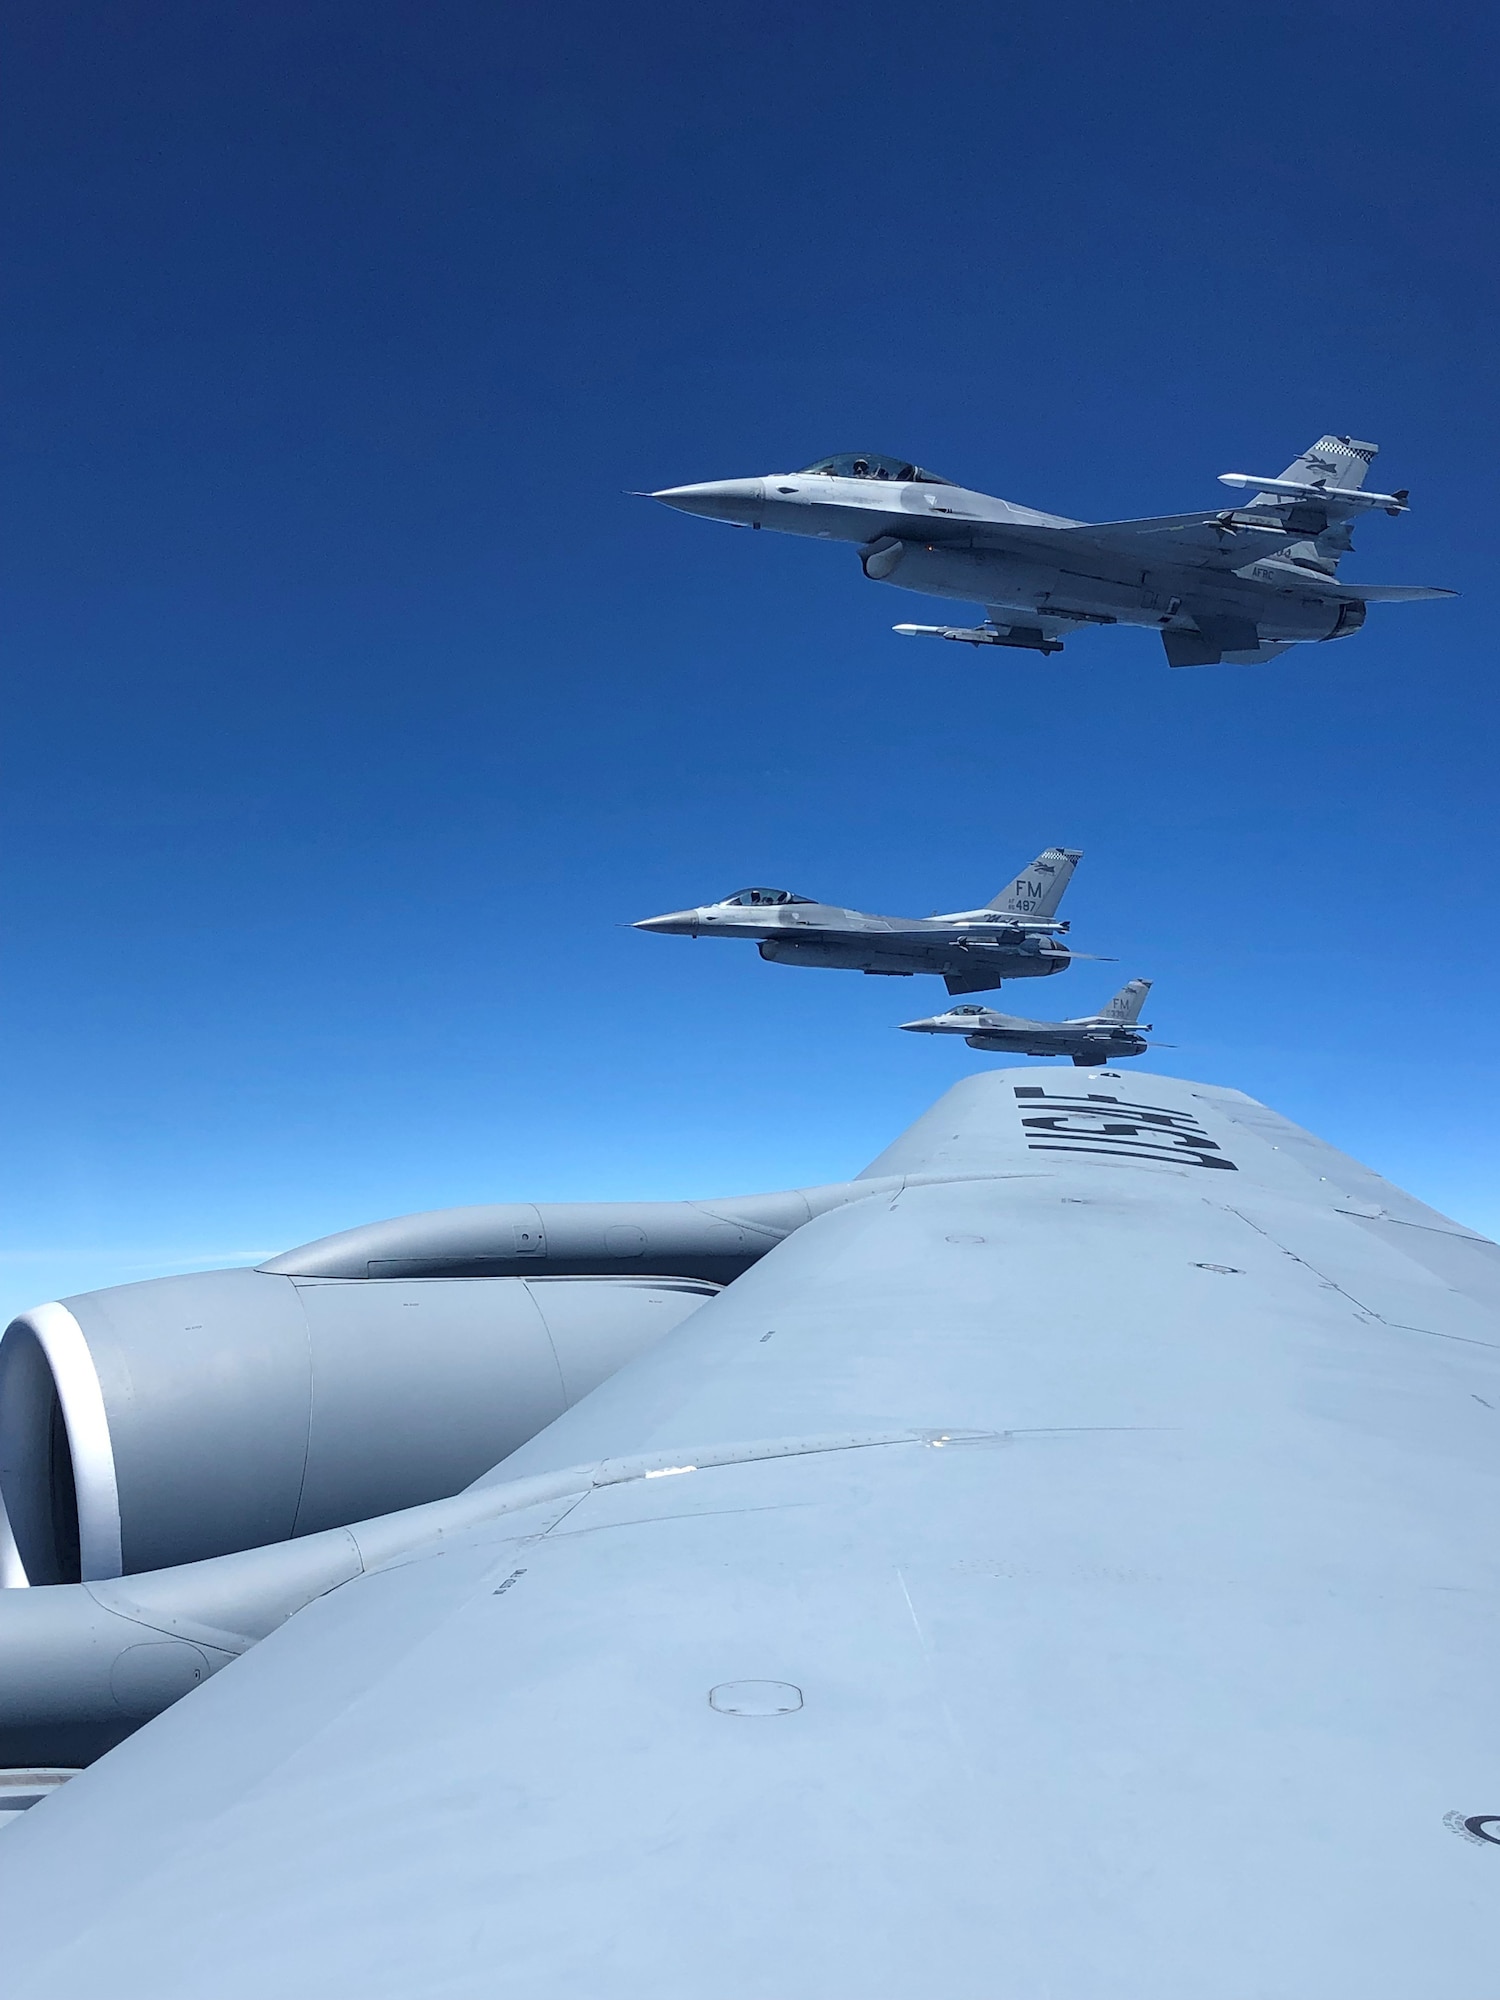 Three F-16 Fighting Falcon aircraft assigned to Homestead Air Reserve Base, Fla., fly in formation alongside the  wing of a KC-135 Stratotanker from MacDill Air Force Base, Fla., prior to an in-flight refueling, Apr. 15, 2019.